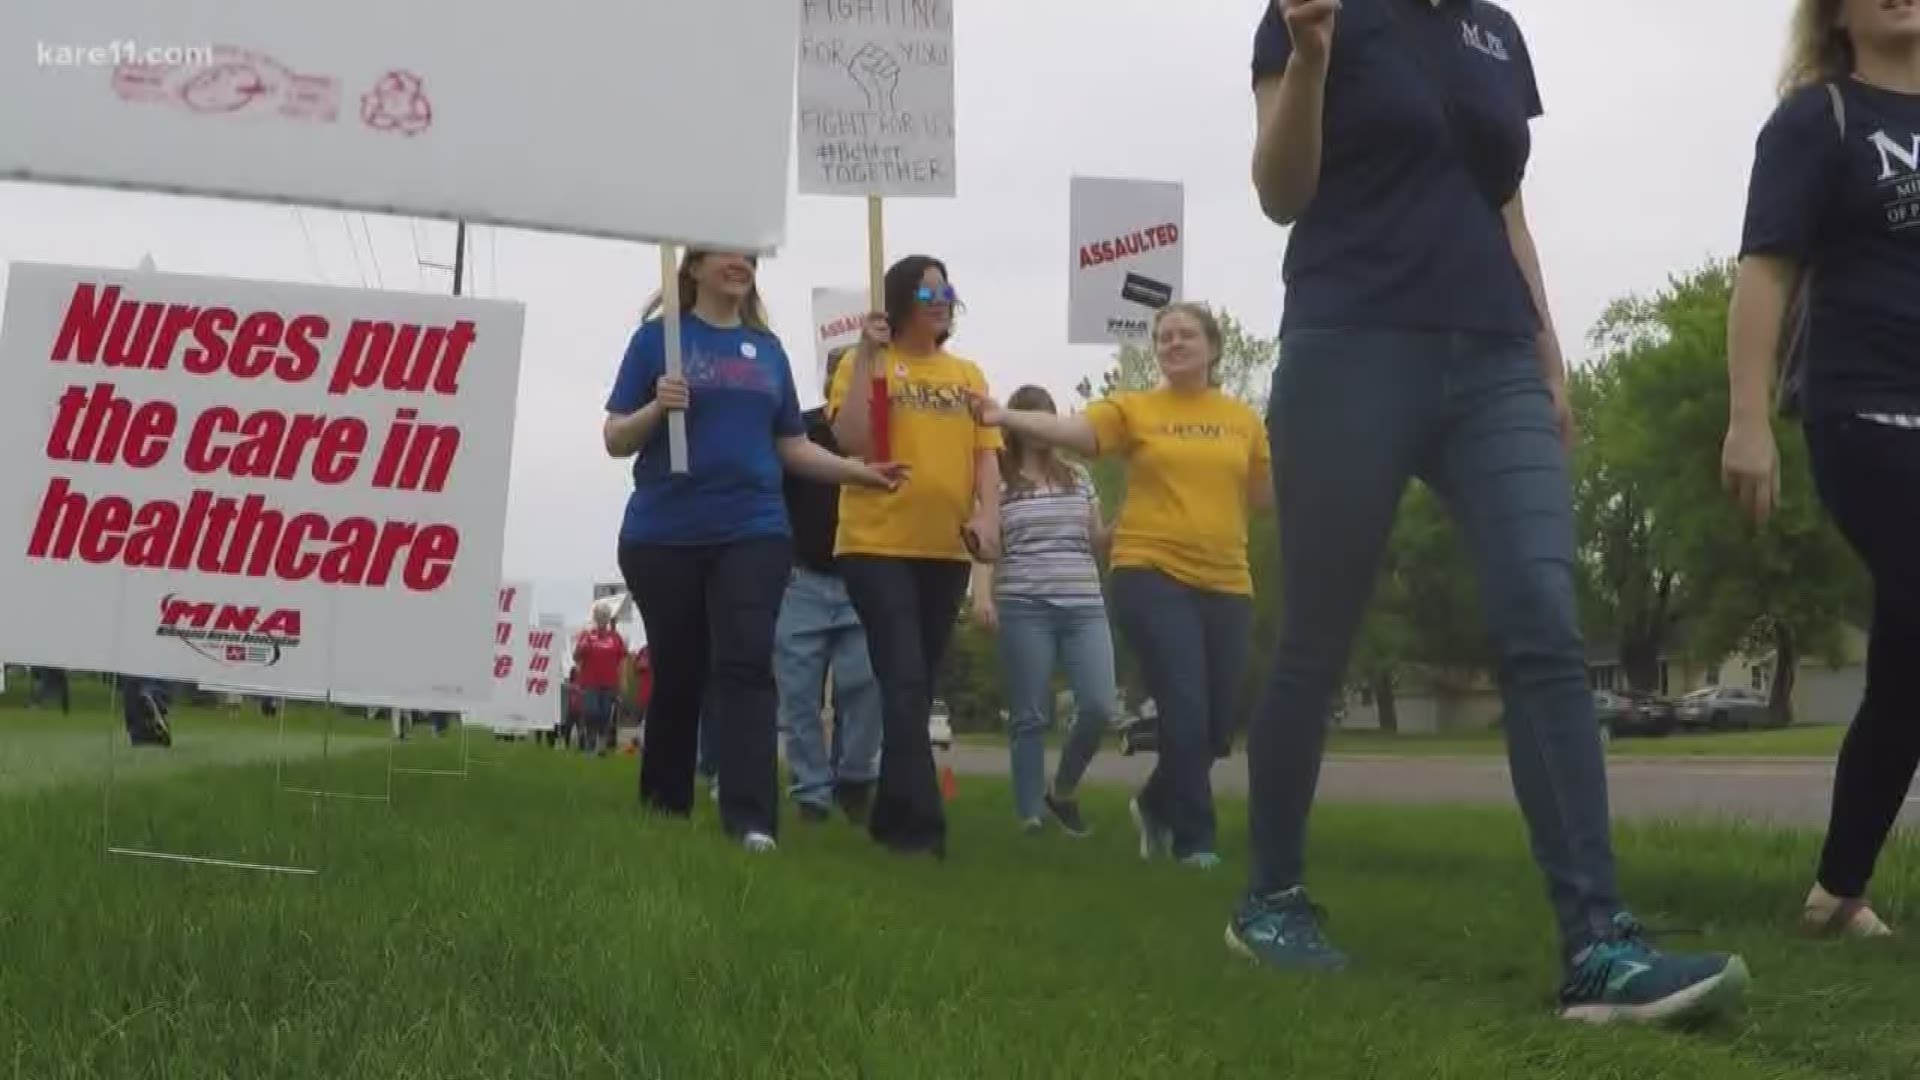 Nurses and support staff spend the day walking informational picket line at the Anoka Metro Regional Treatment Center, in the wake of brutal attack on nurse.